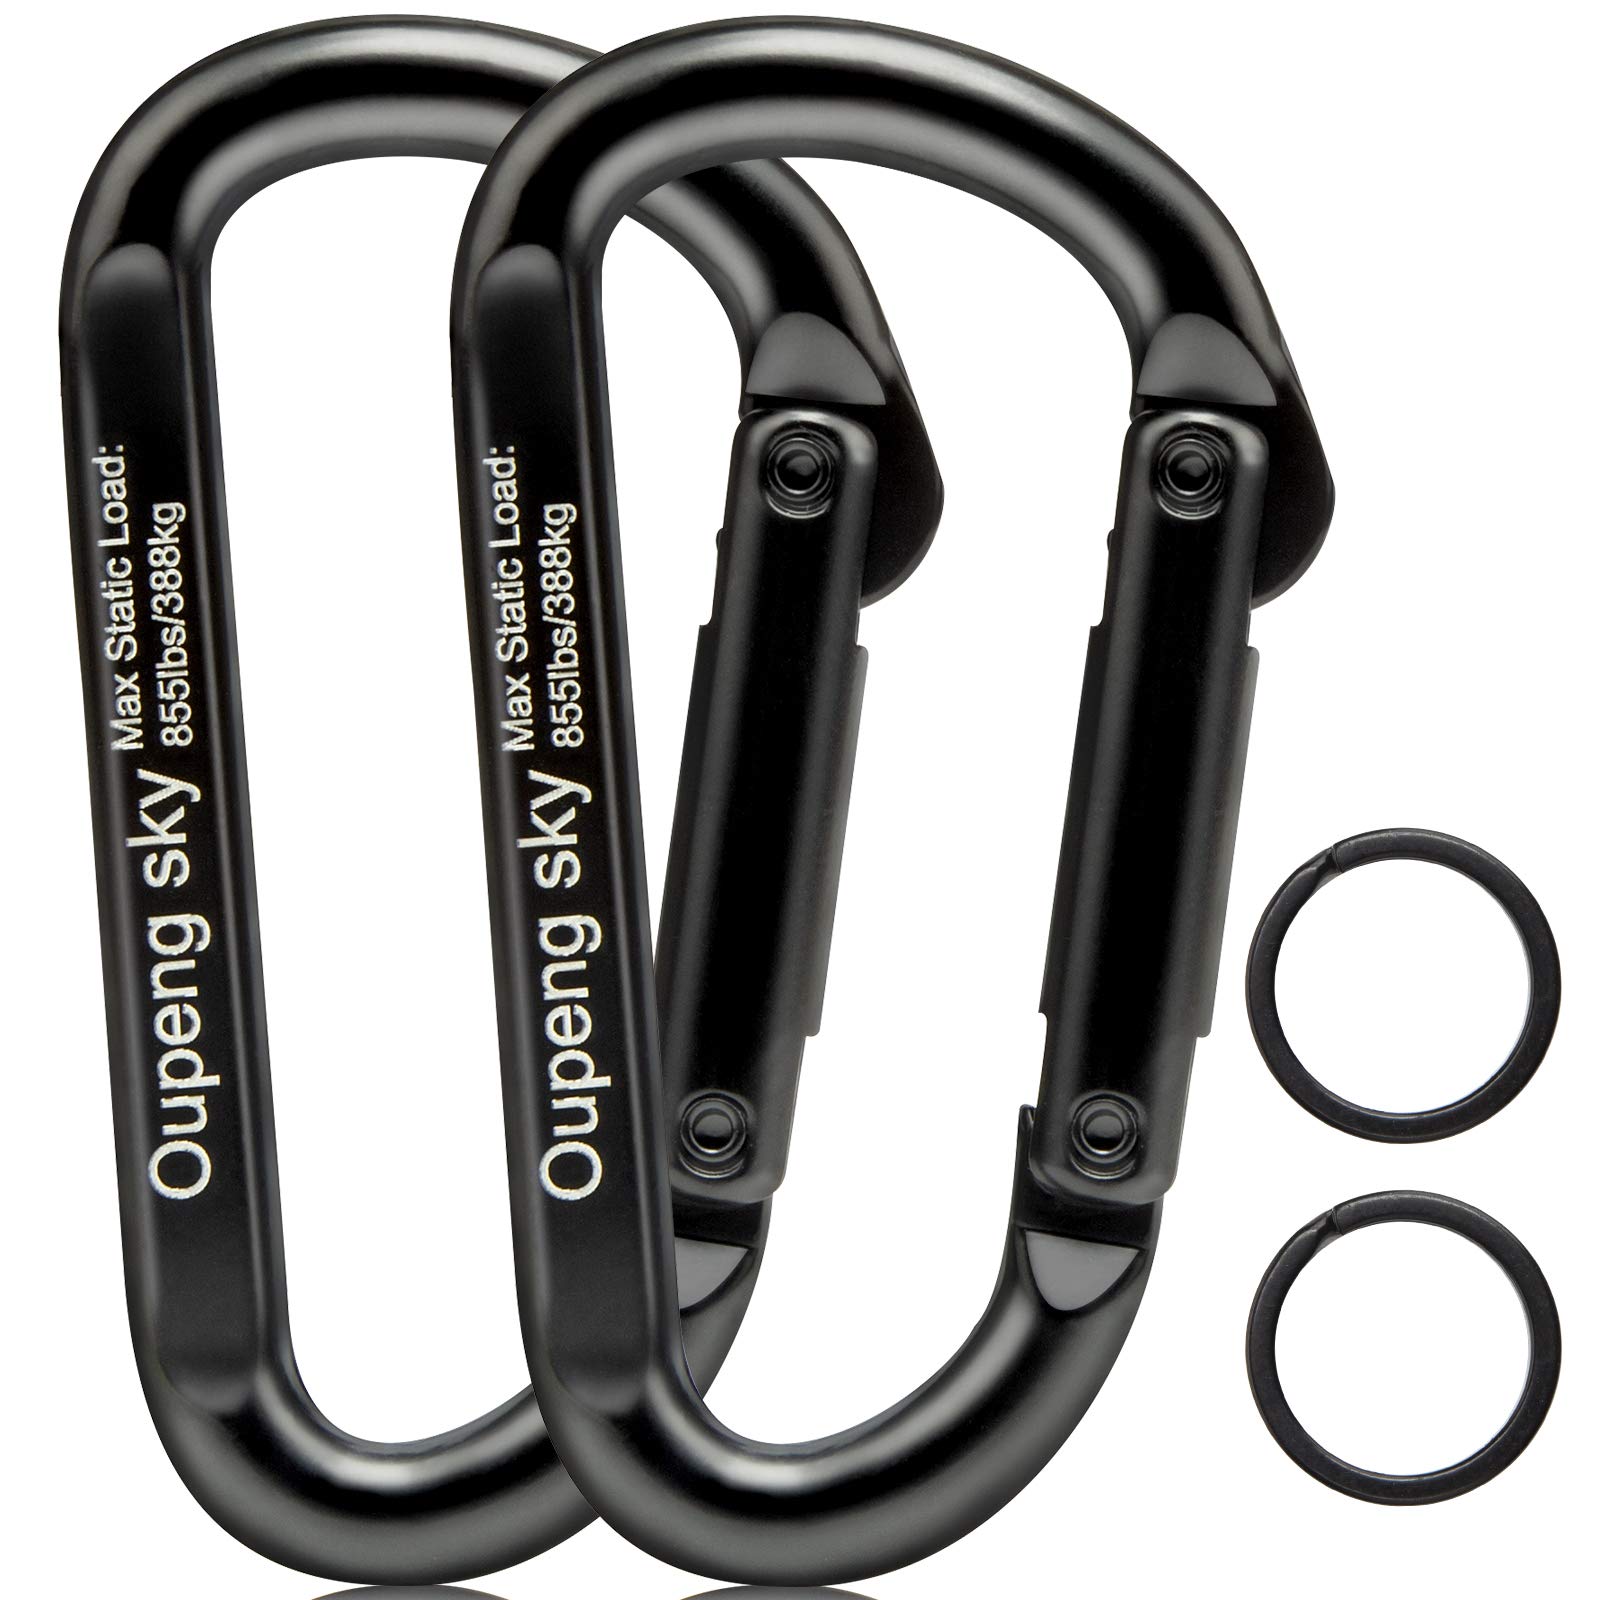 Carabiner Clip, 855lbs,3 Heavy Duty Caribeaners for Hammocks, Camping  Accessories,Hiking,Keychains,Outdoors and Gym etc,D Shaped Spring Hook  Small Carabiners for Dog Leash,Harness and Key Ring,Black 2